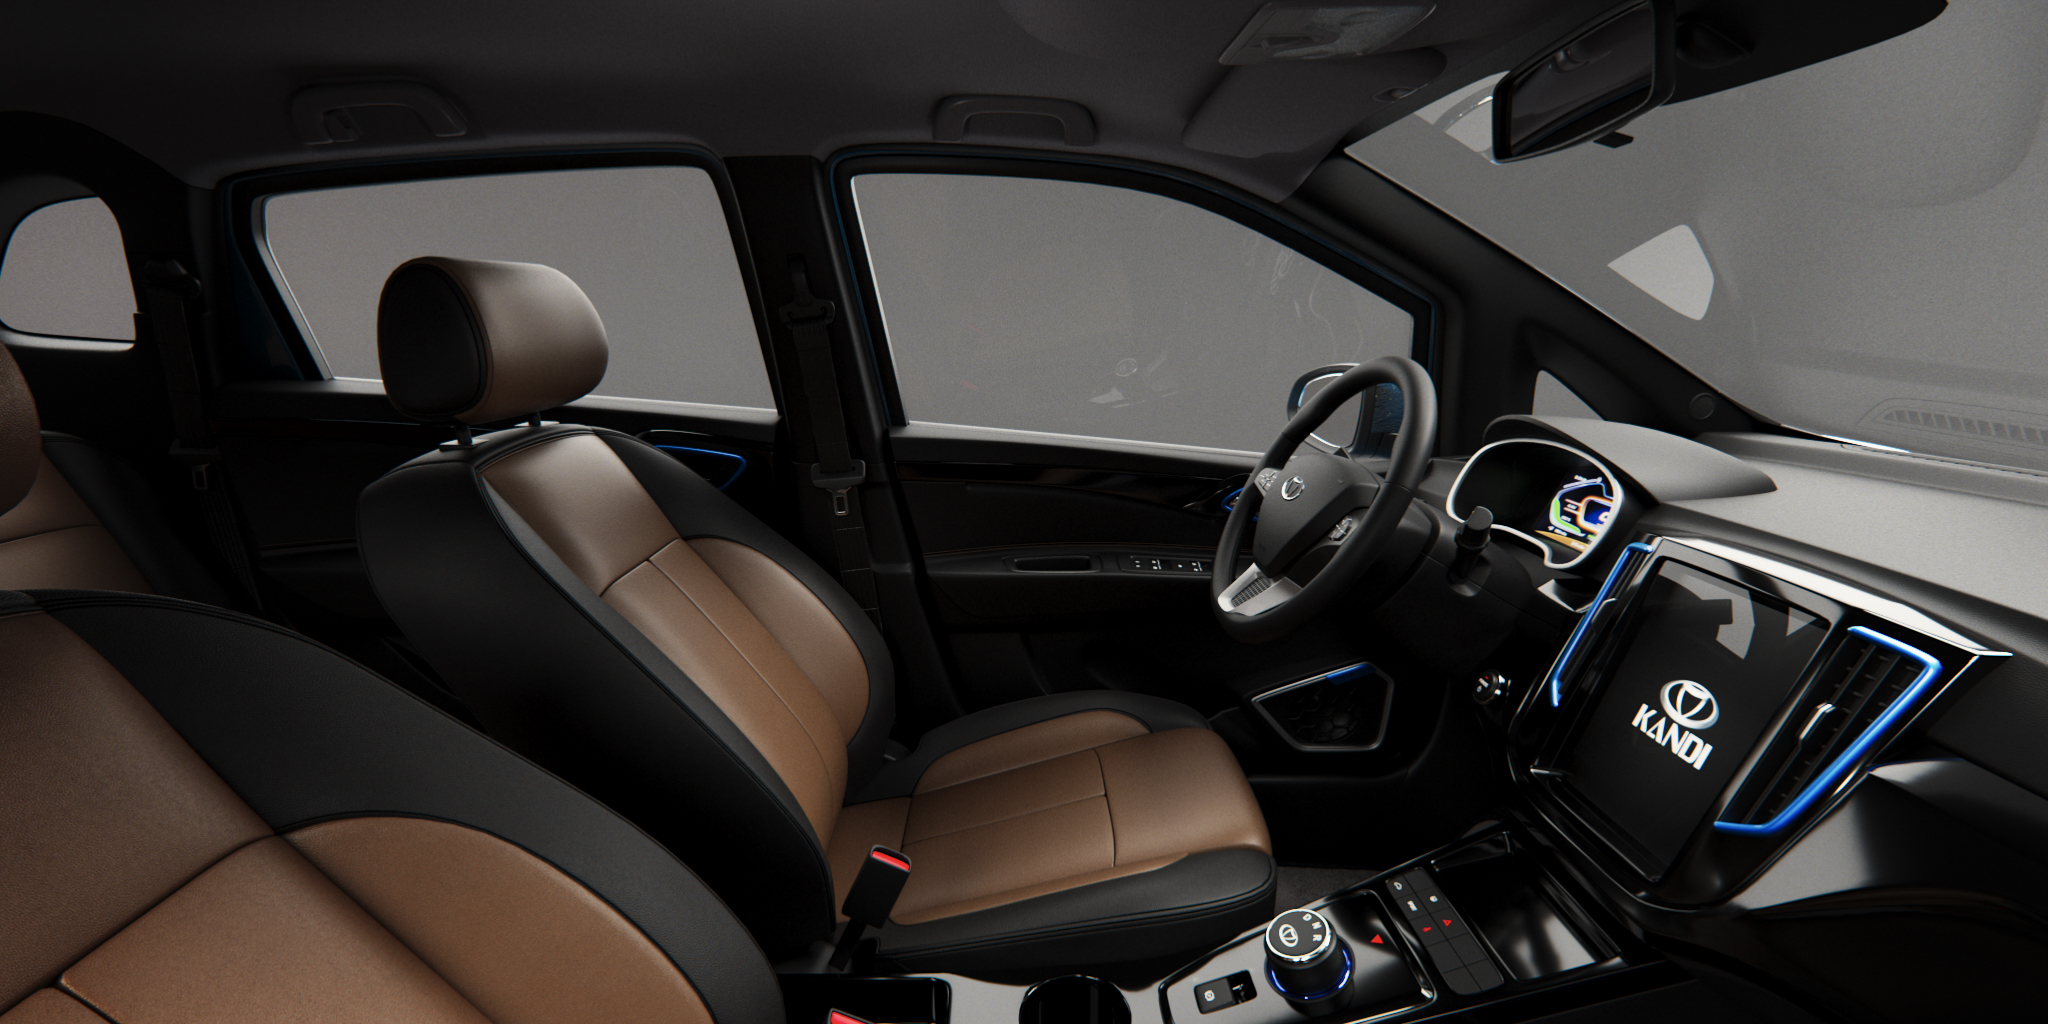 A render of the interior of a Kandi car.